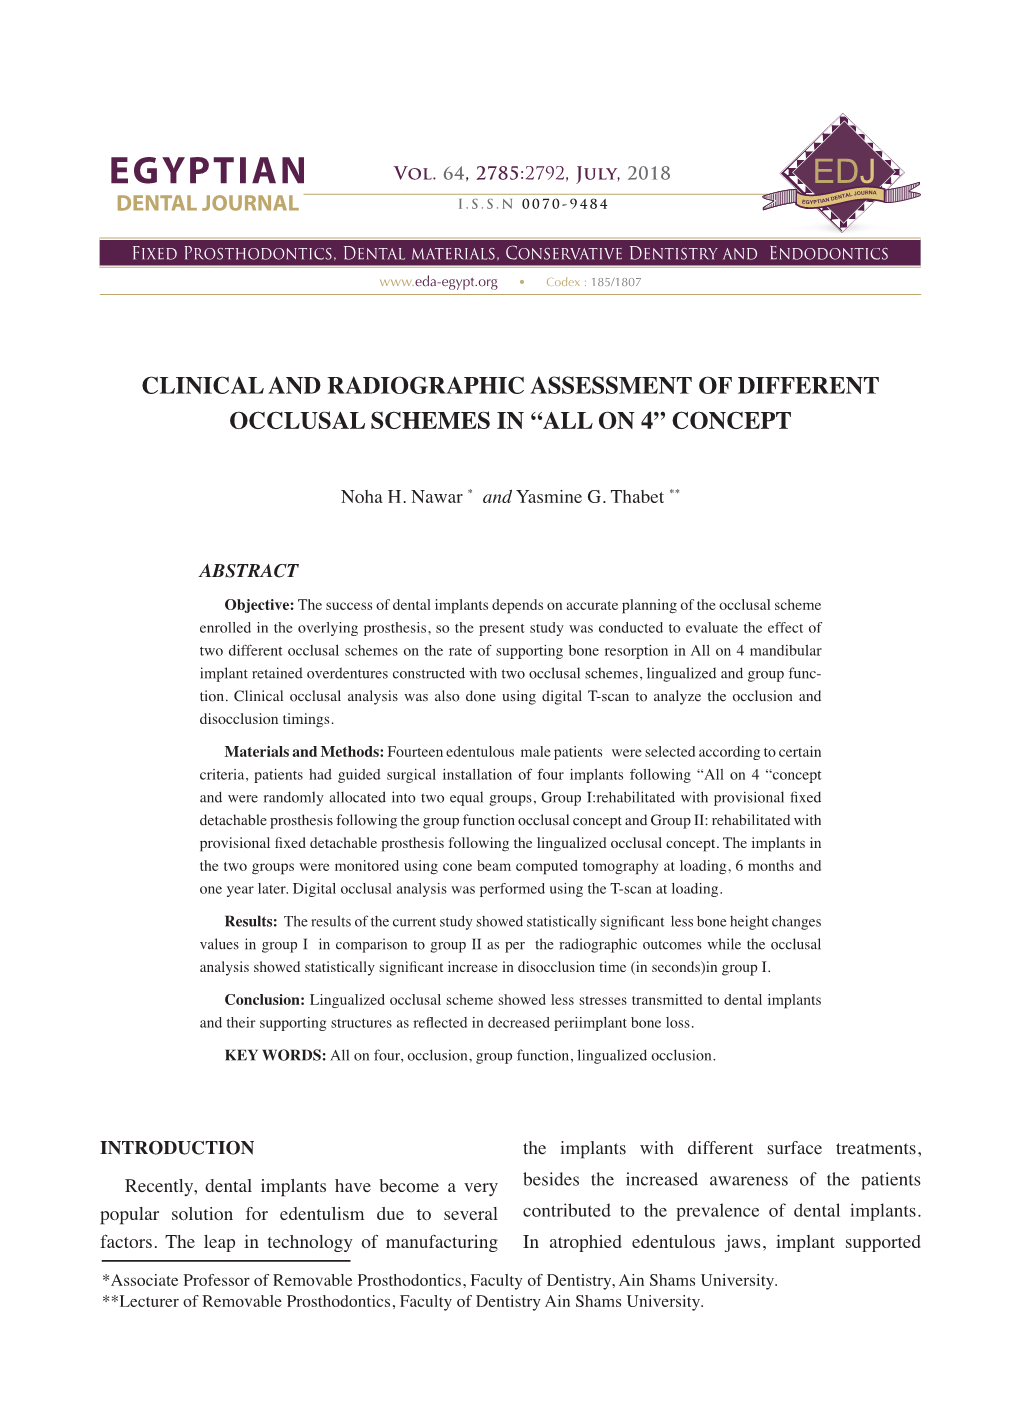 Clinical and Radiographic Assessment of Different Occlusal Schemes in “All on 4” Concept